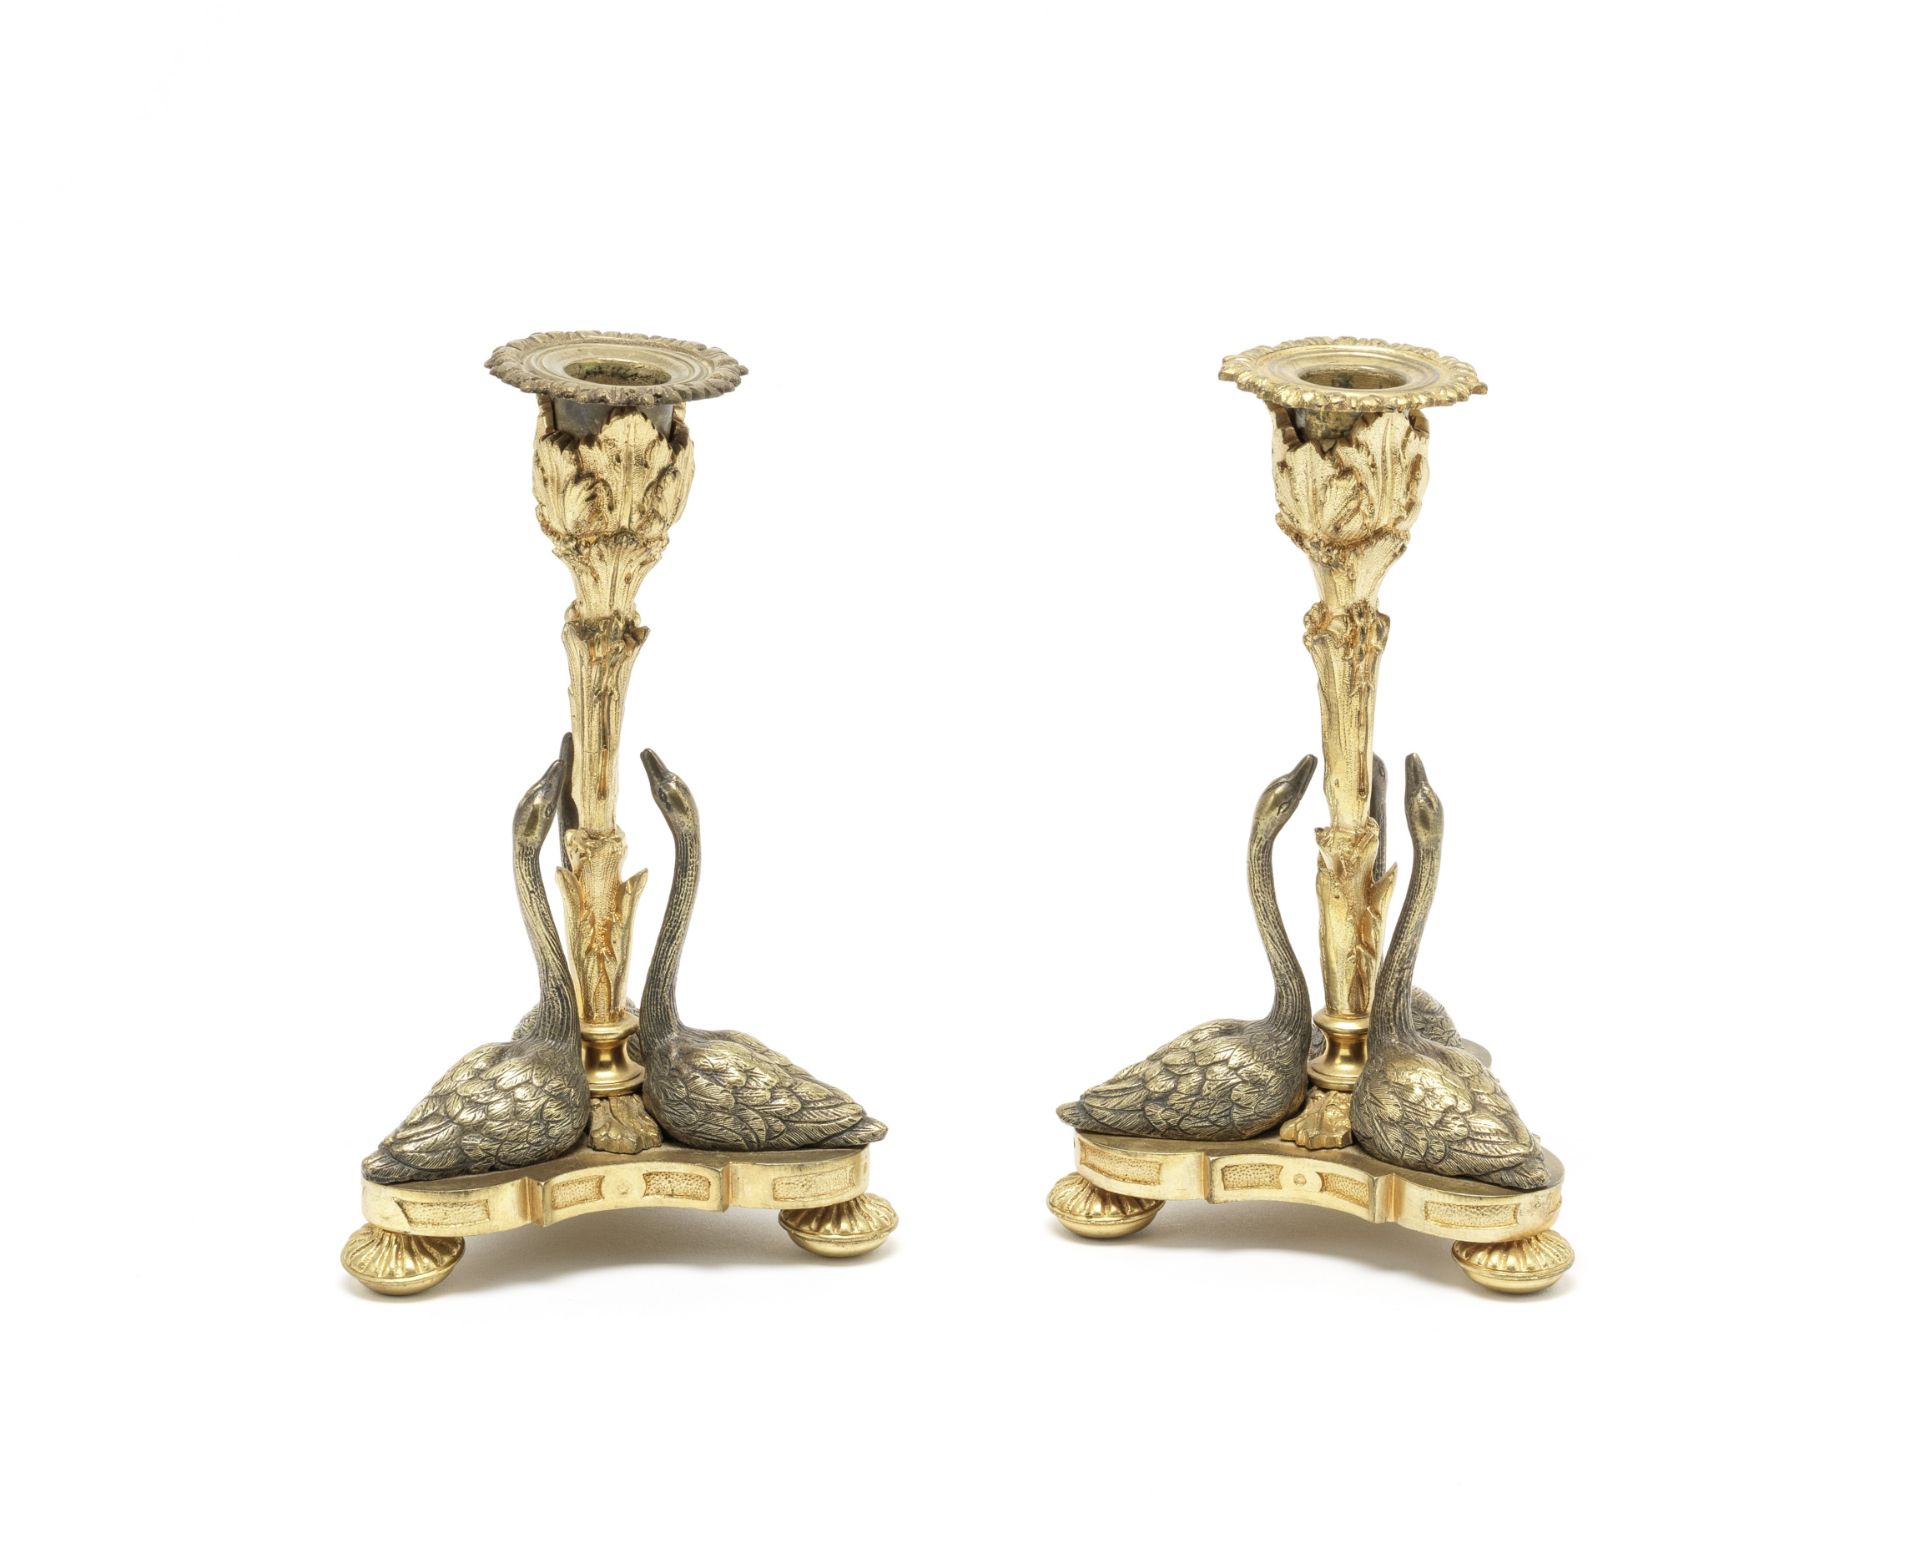 A pair of early Victorian silvered and parcel gilt swan candlesticks after a design by William Ba...